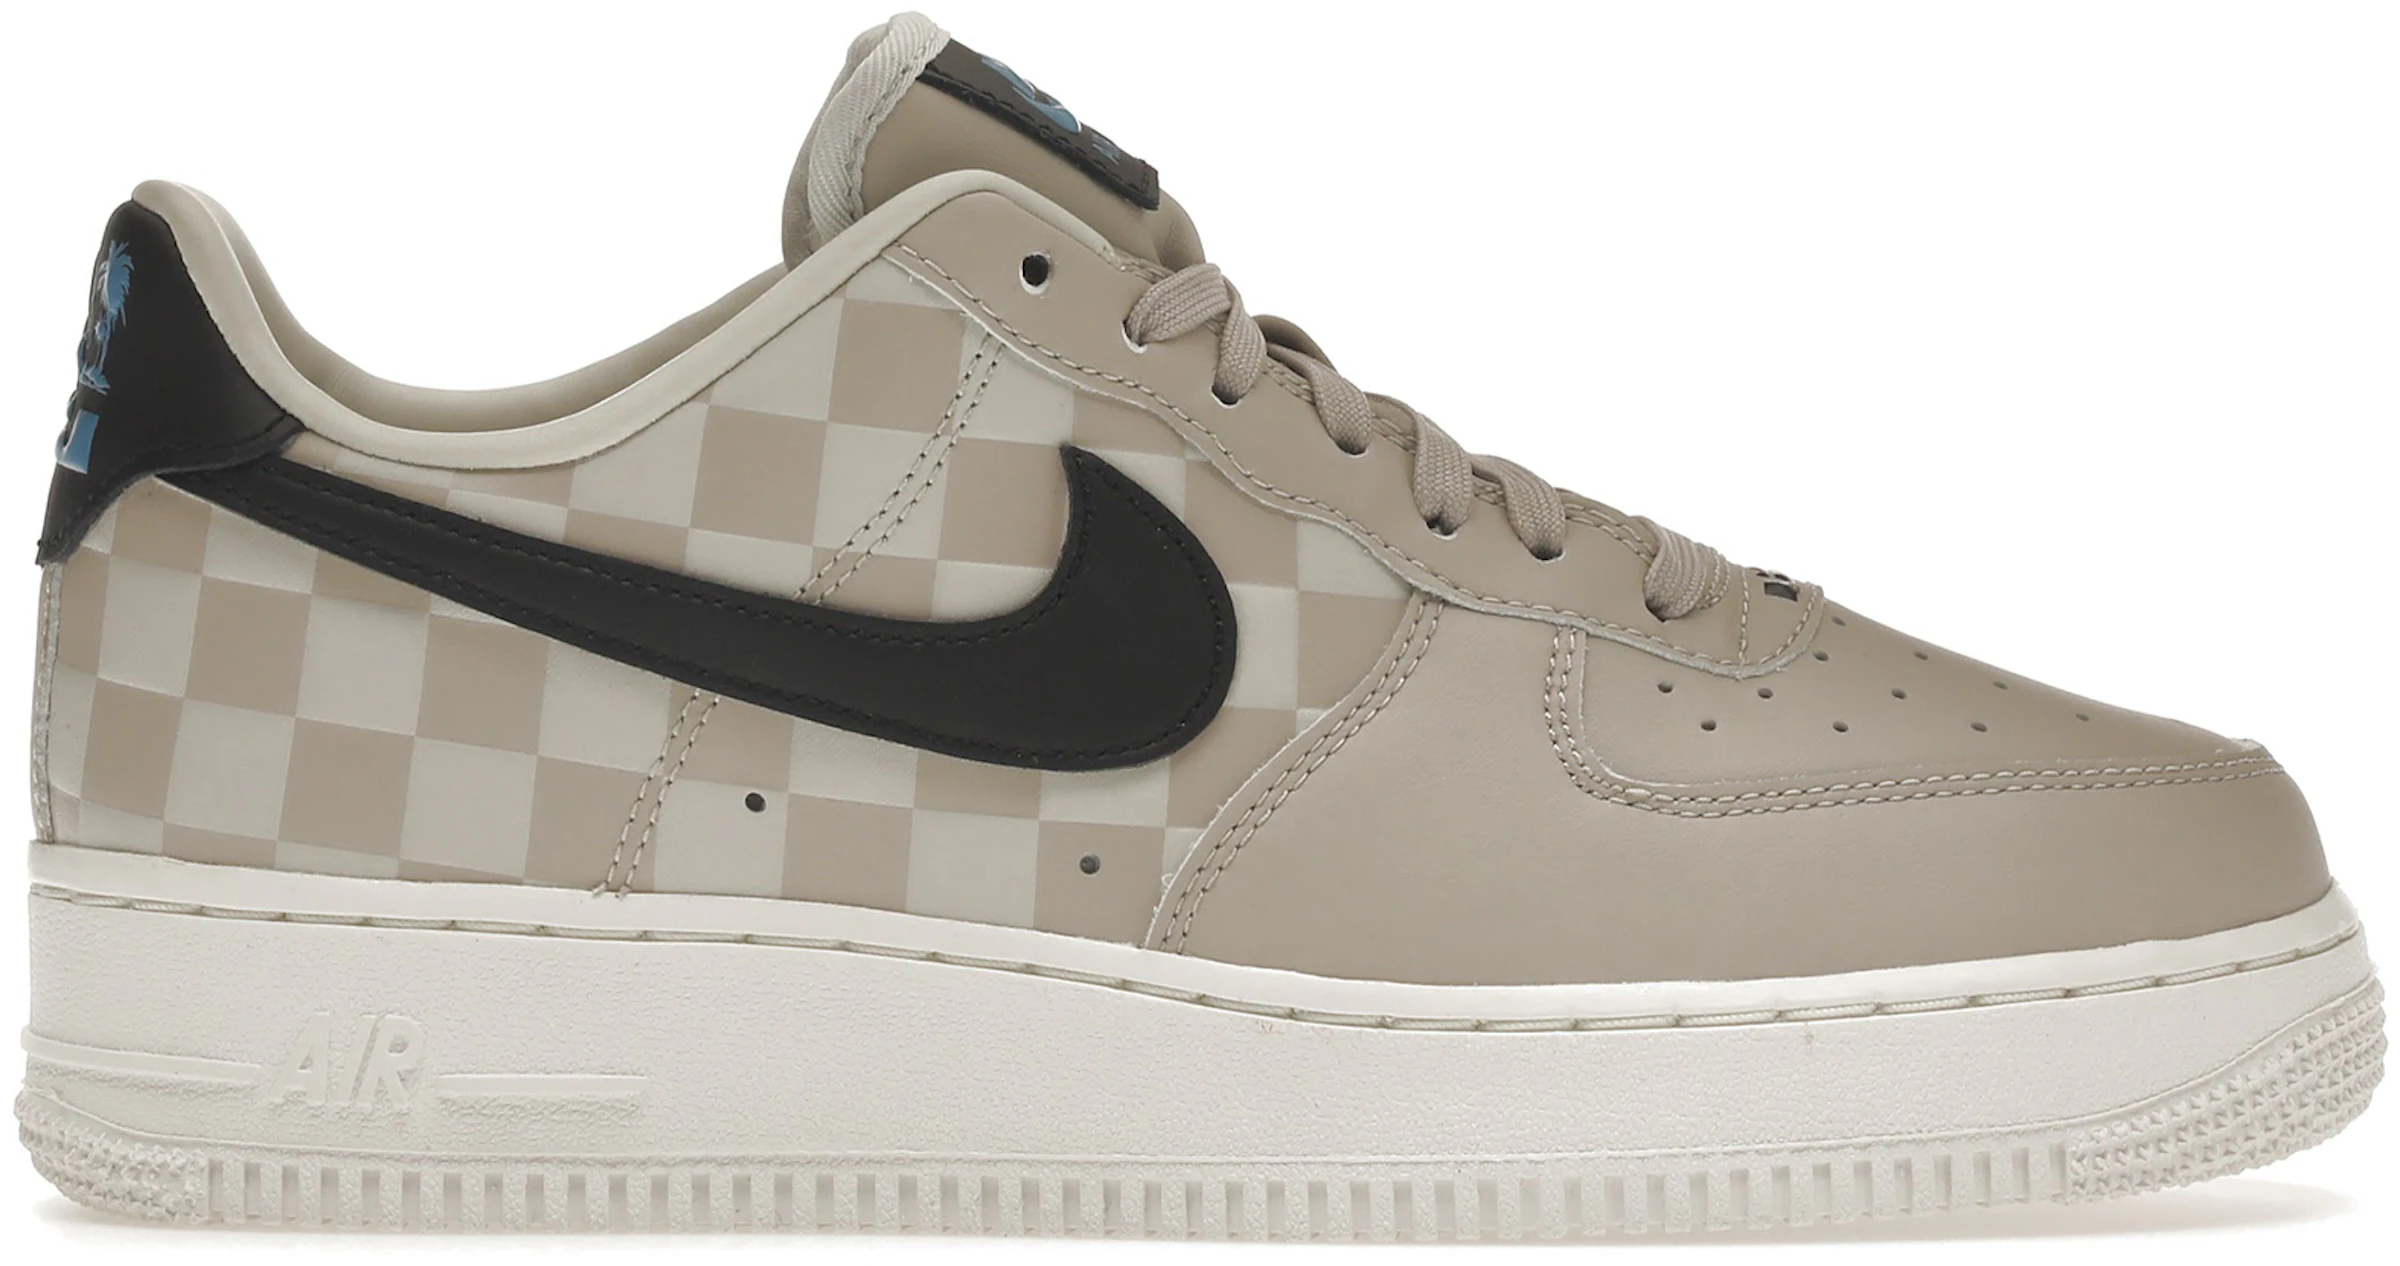 Nike Air Force 1 Low LeBron James Strive For Greatness - DC8877-200 -